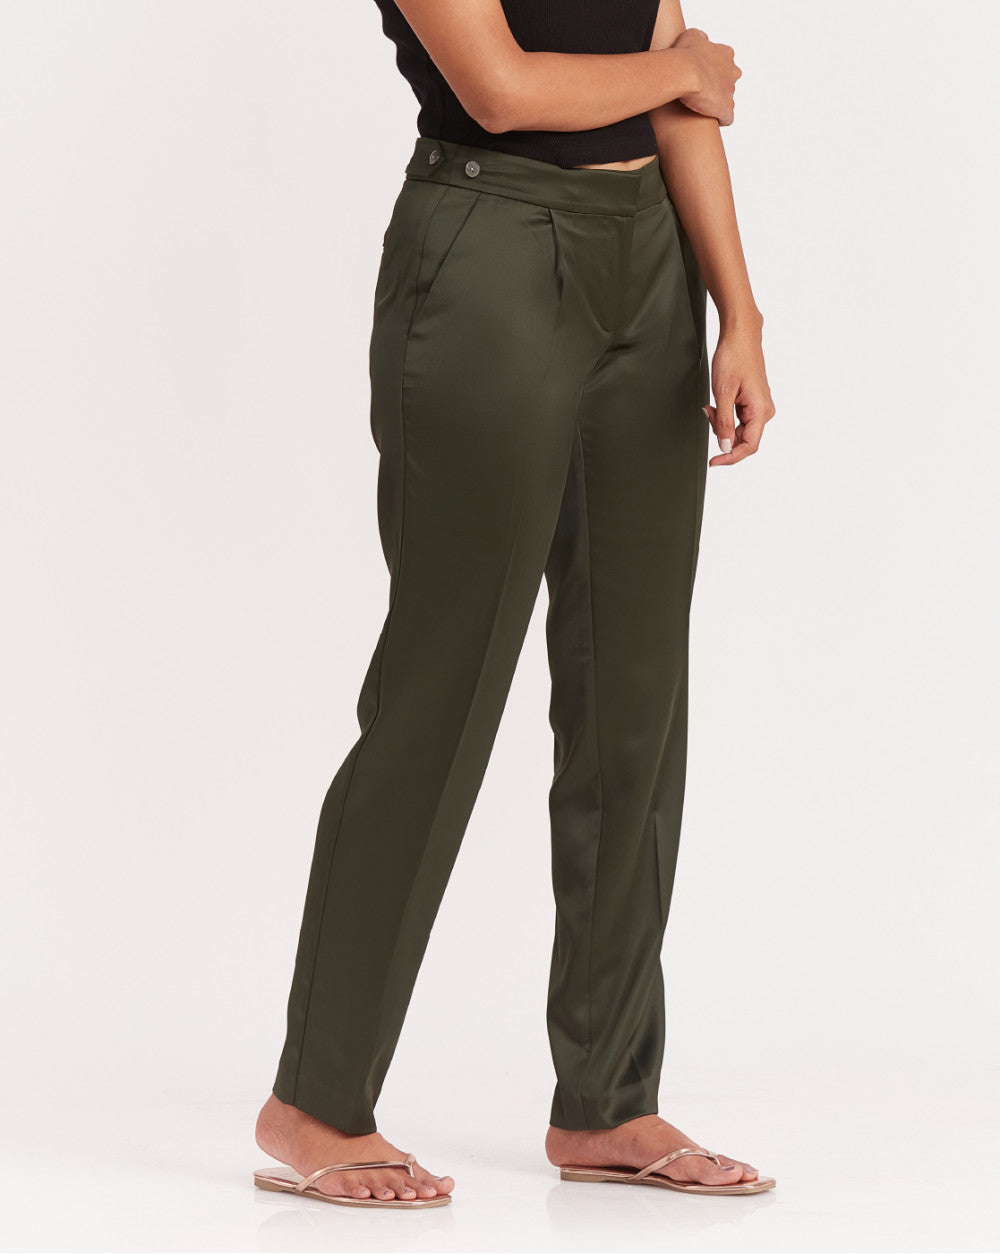 Tapered Fit Satin Smart Pants - Seaweed Green